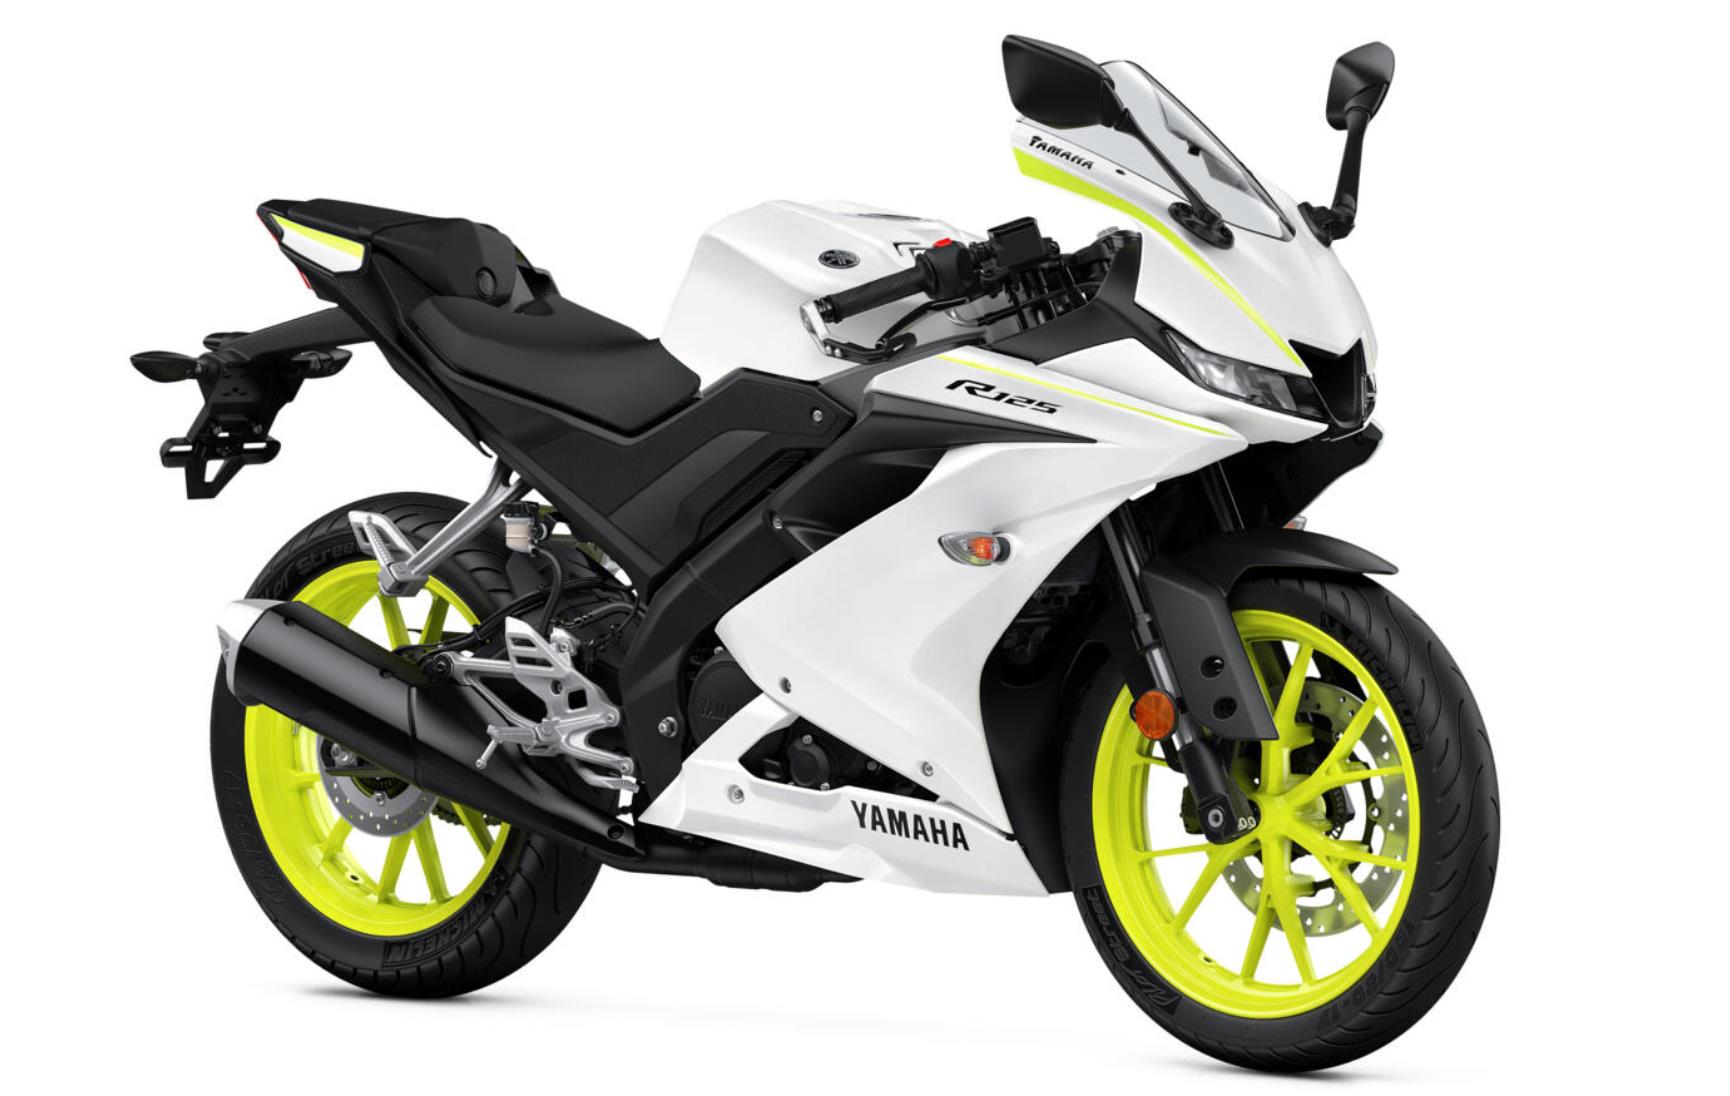 Yamaha YZF-R125 Specifications and Expected Price in India